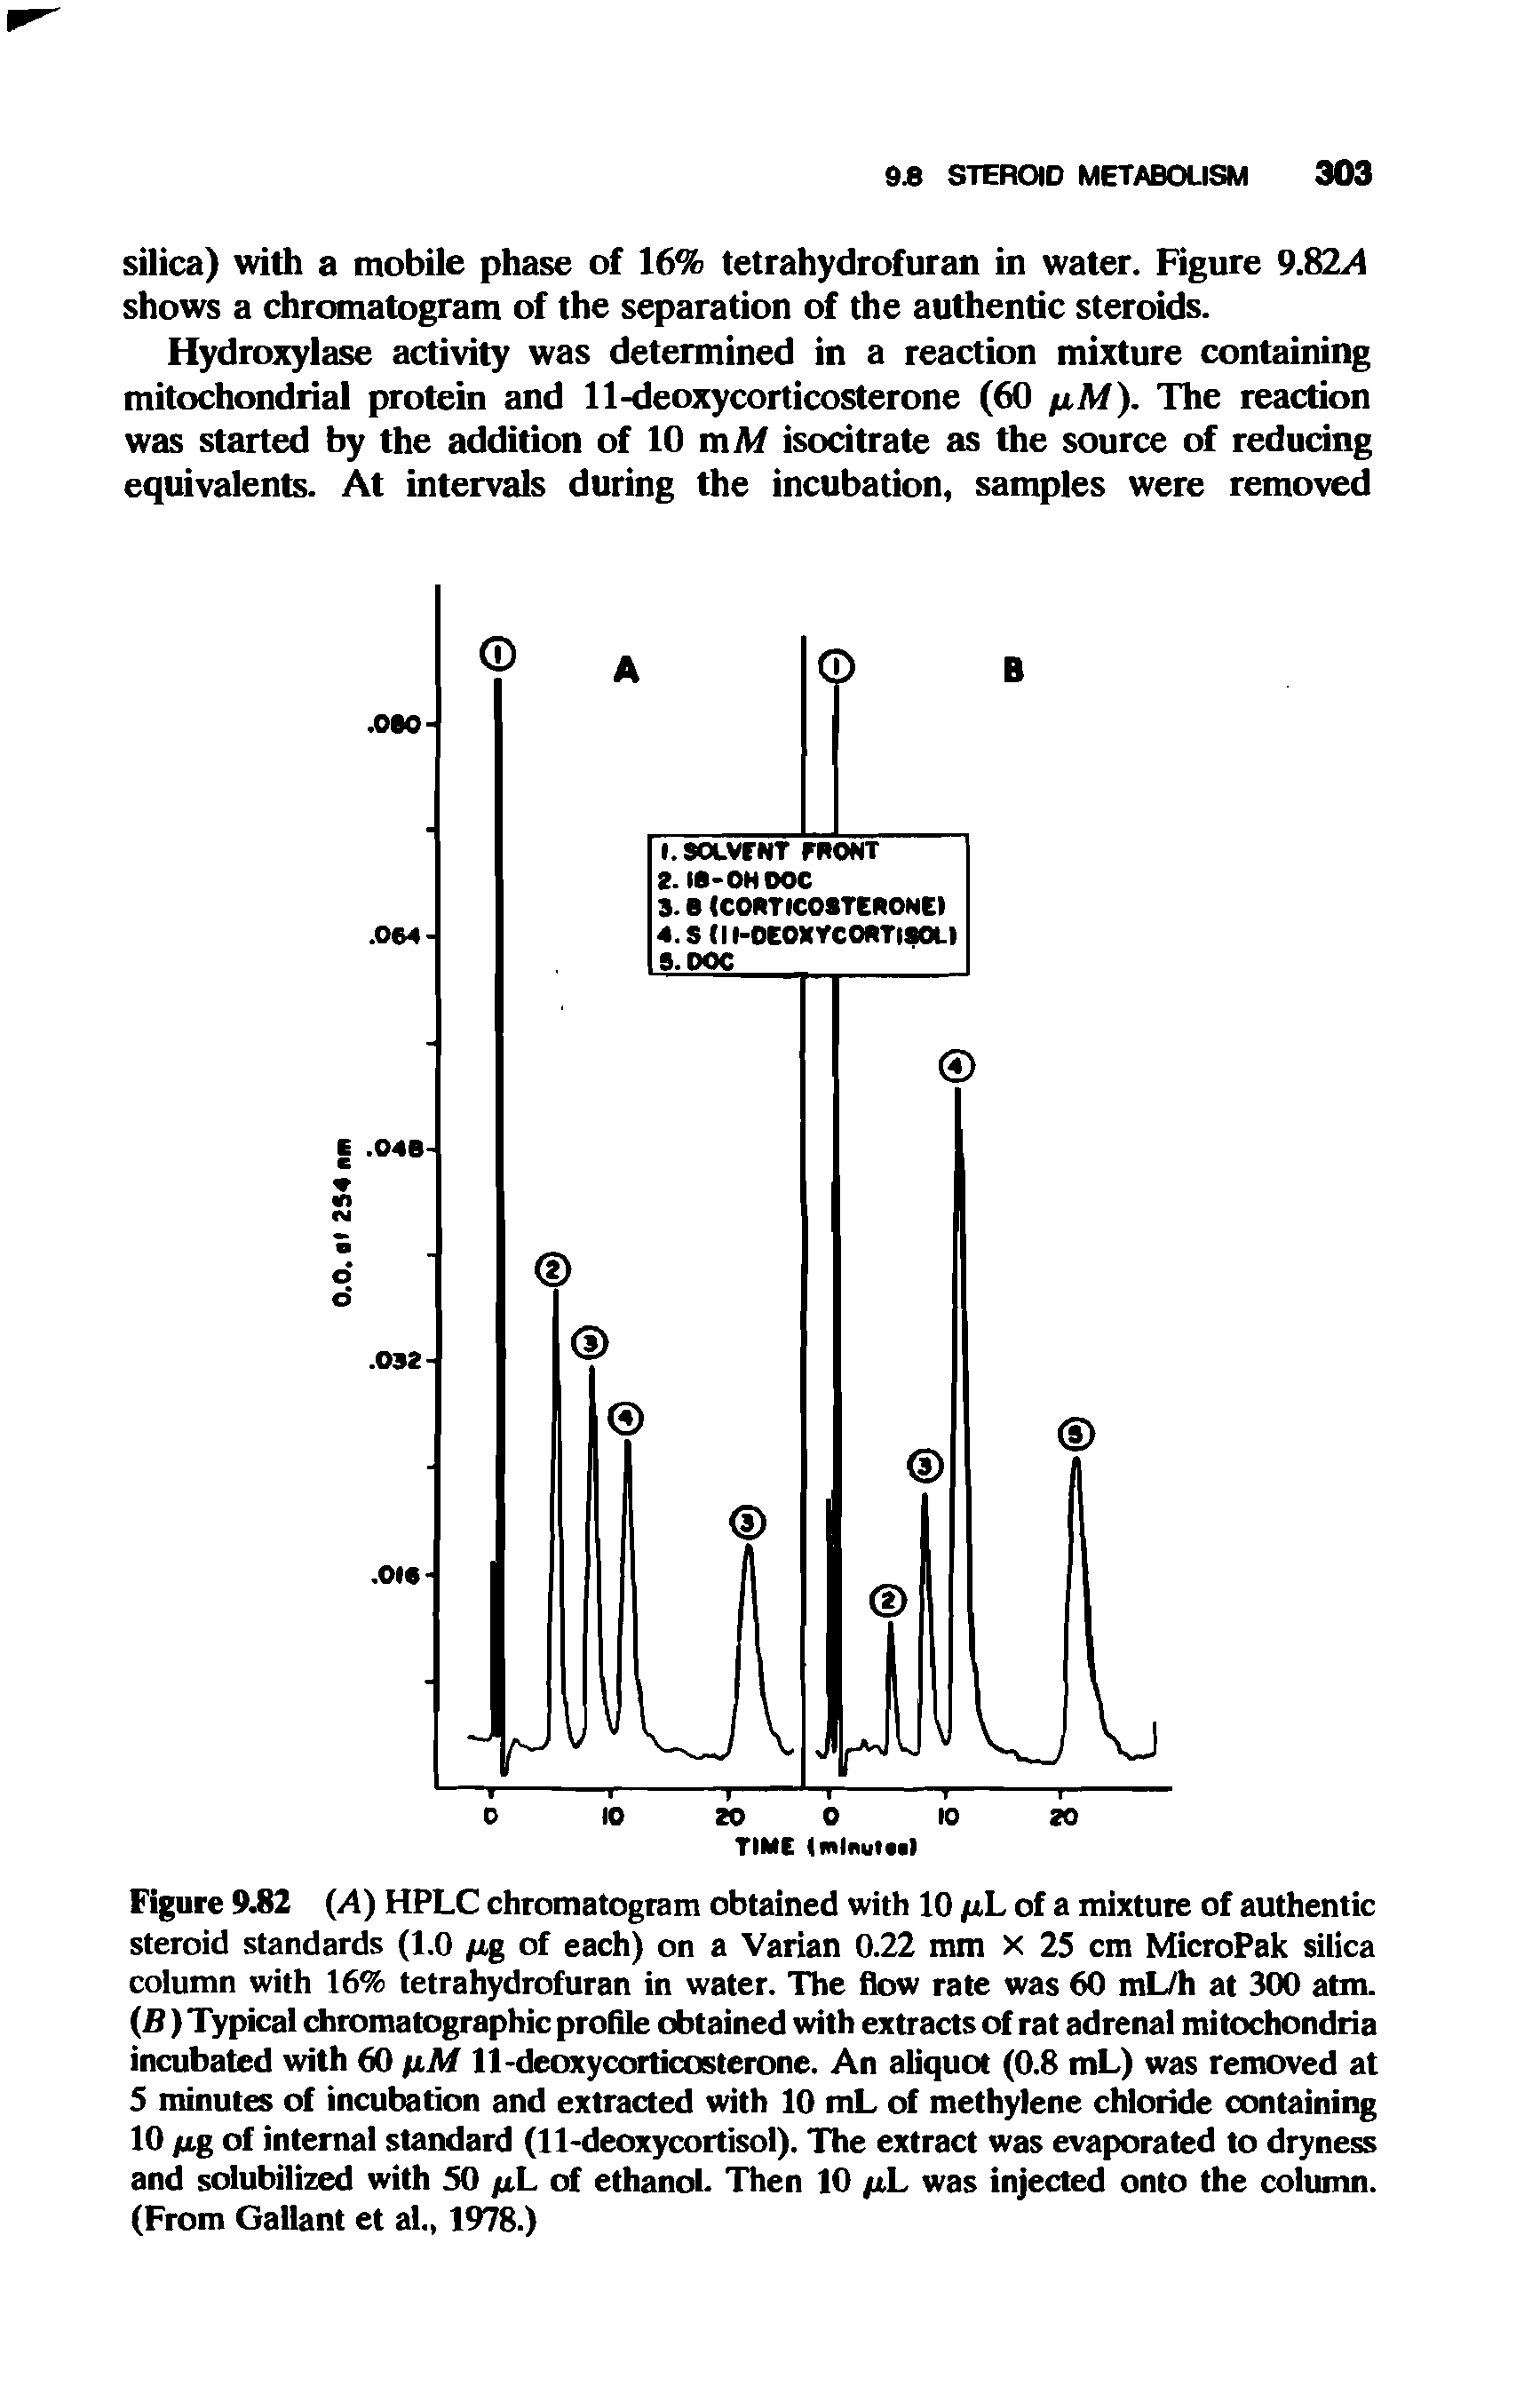 Figure 9.82 (/4) HPLC chromatogram obtained with 10 fiL of a mixture of authentic steroid standards (1.0 /xg of each) on a Varian 0.22 mm X 25 cm MicroPak silica column with 16% tetrahydrofuran in water. The flow rate was 60 mL/h at 300 atm. (B) Typical chromatographic profile obtained with extracts of rat adrenal mitochondria incubated with 60 nM 11-deoxycorticosterone. An aliquot (0.8 mL) was removed at 5 minutes of incubation and extracted with 10 mL of methylene chloride containing 10 fig of internal standard (11-deoxycortisol). The extract was evaporated to dryness and solubilized with 50 /xL of ethanol. Then 10 /xL was injected onto the column. (From Gallant et al., 1978.)...